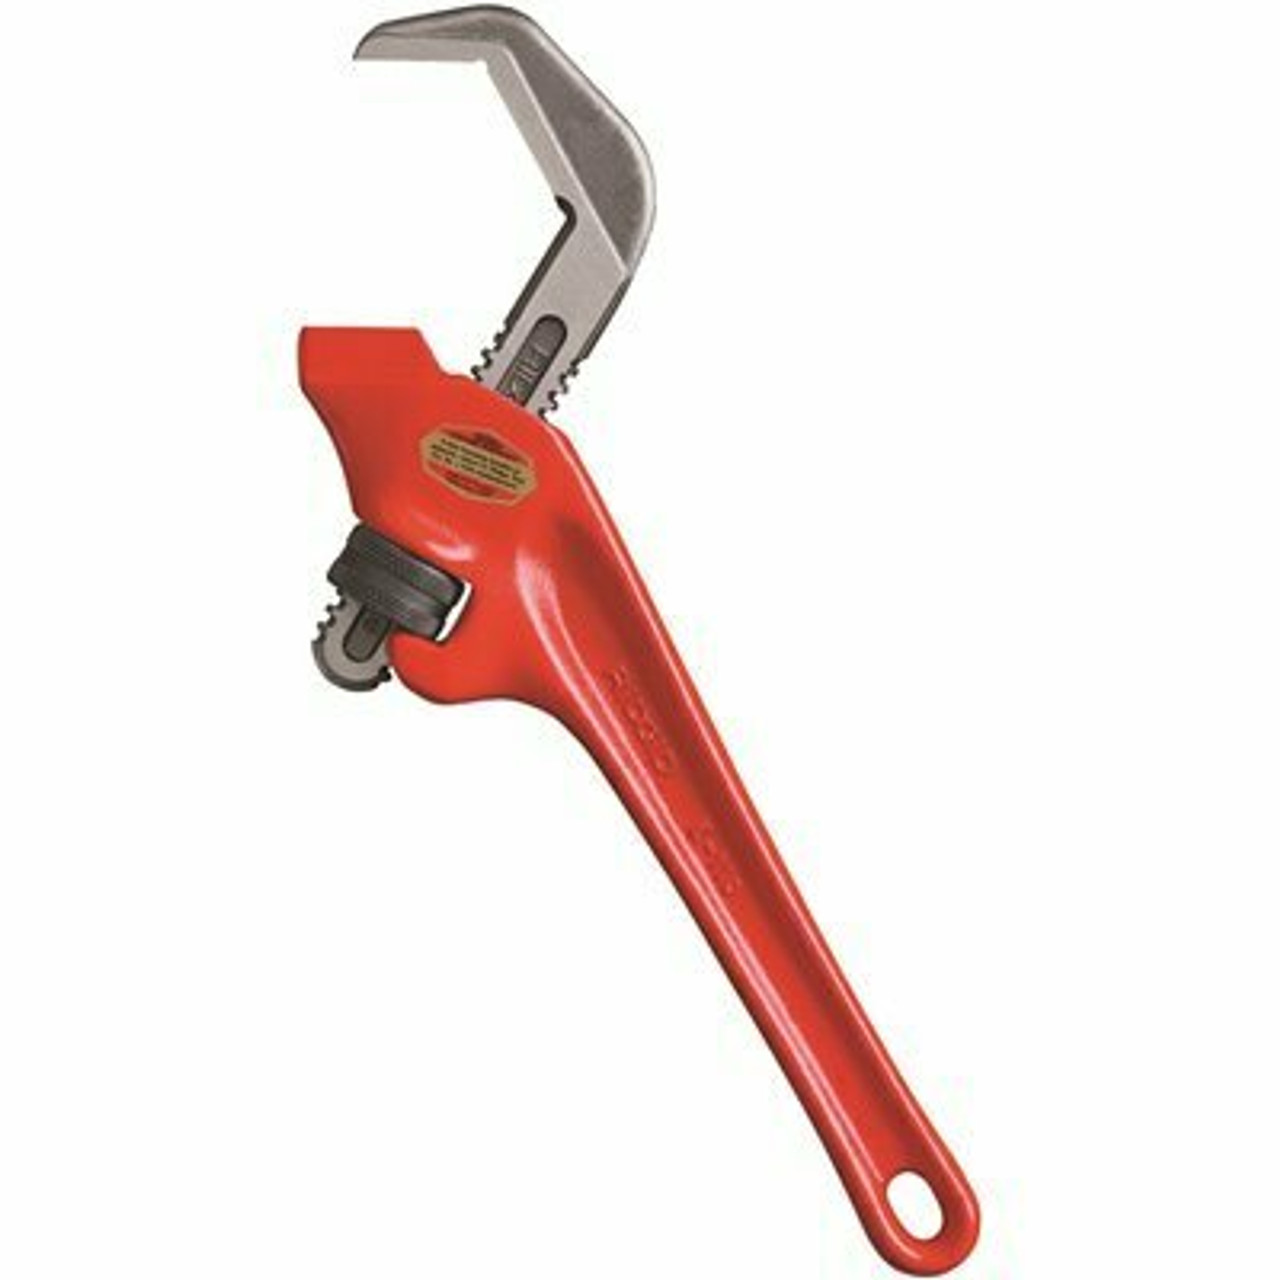 Ridgid 1-1/8 In. To 2-5/8 In. E-110 Hex Wrench